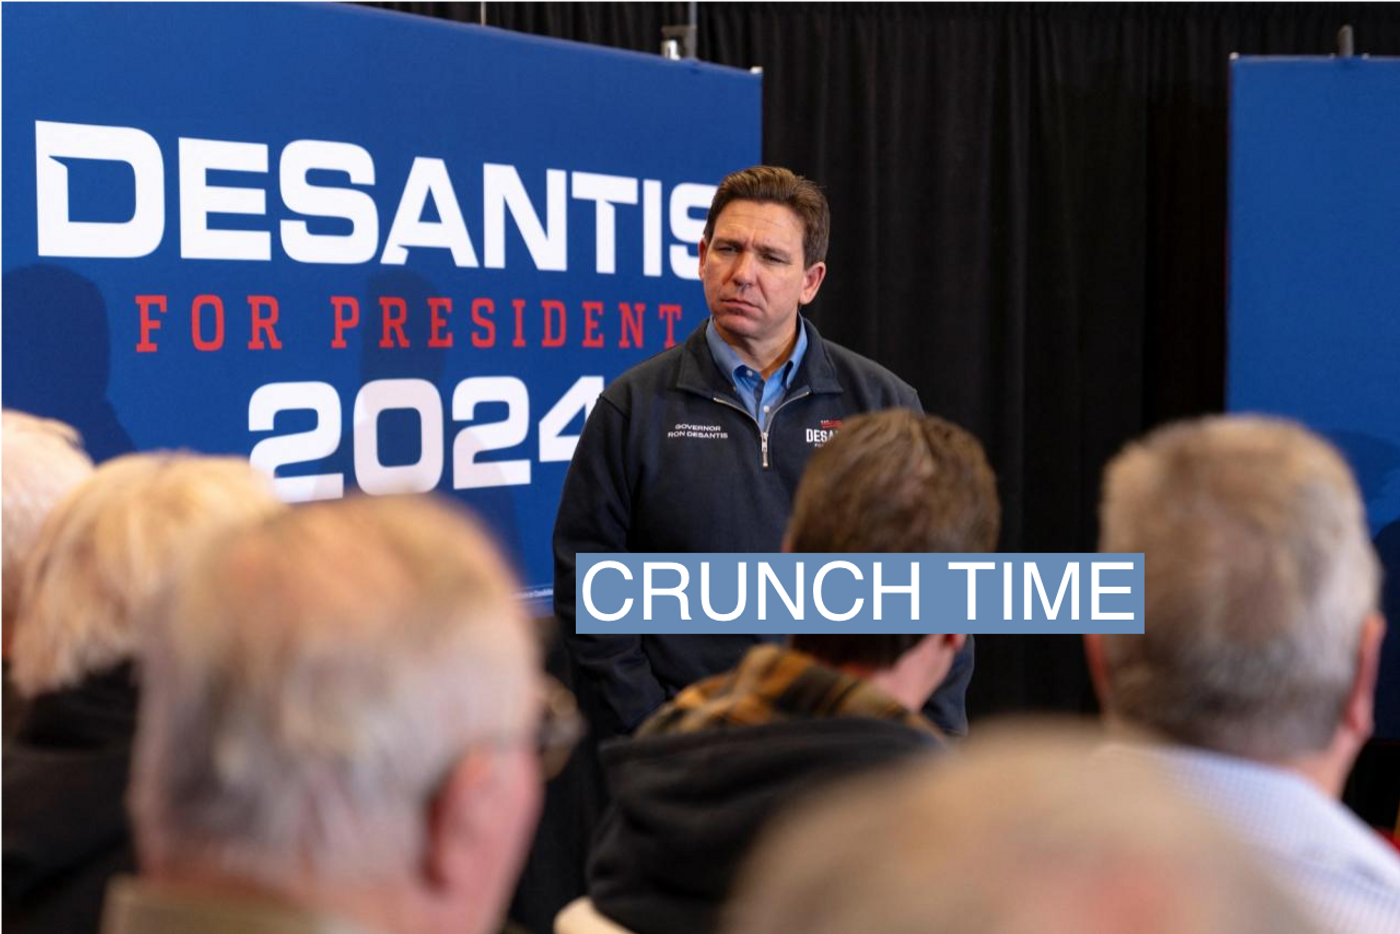 Republican presidential candidate Florida Governor Ron DeSantis listens to a question from an audience member during a campaign event in Waukee, Iowa, U.S., January 3, 2024.